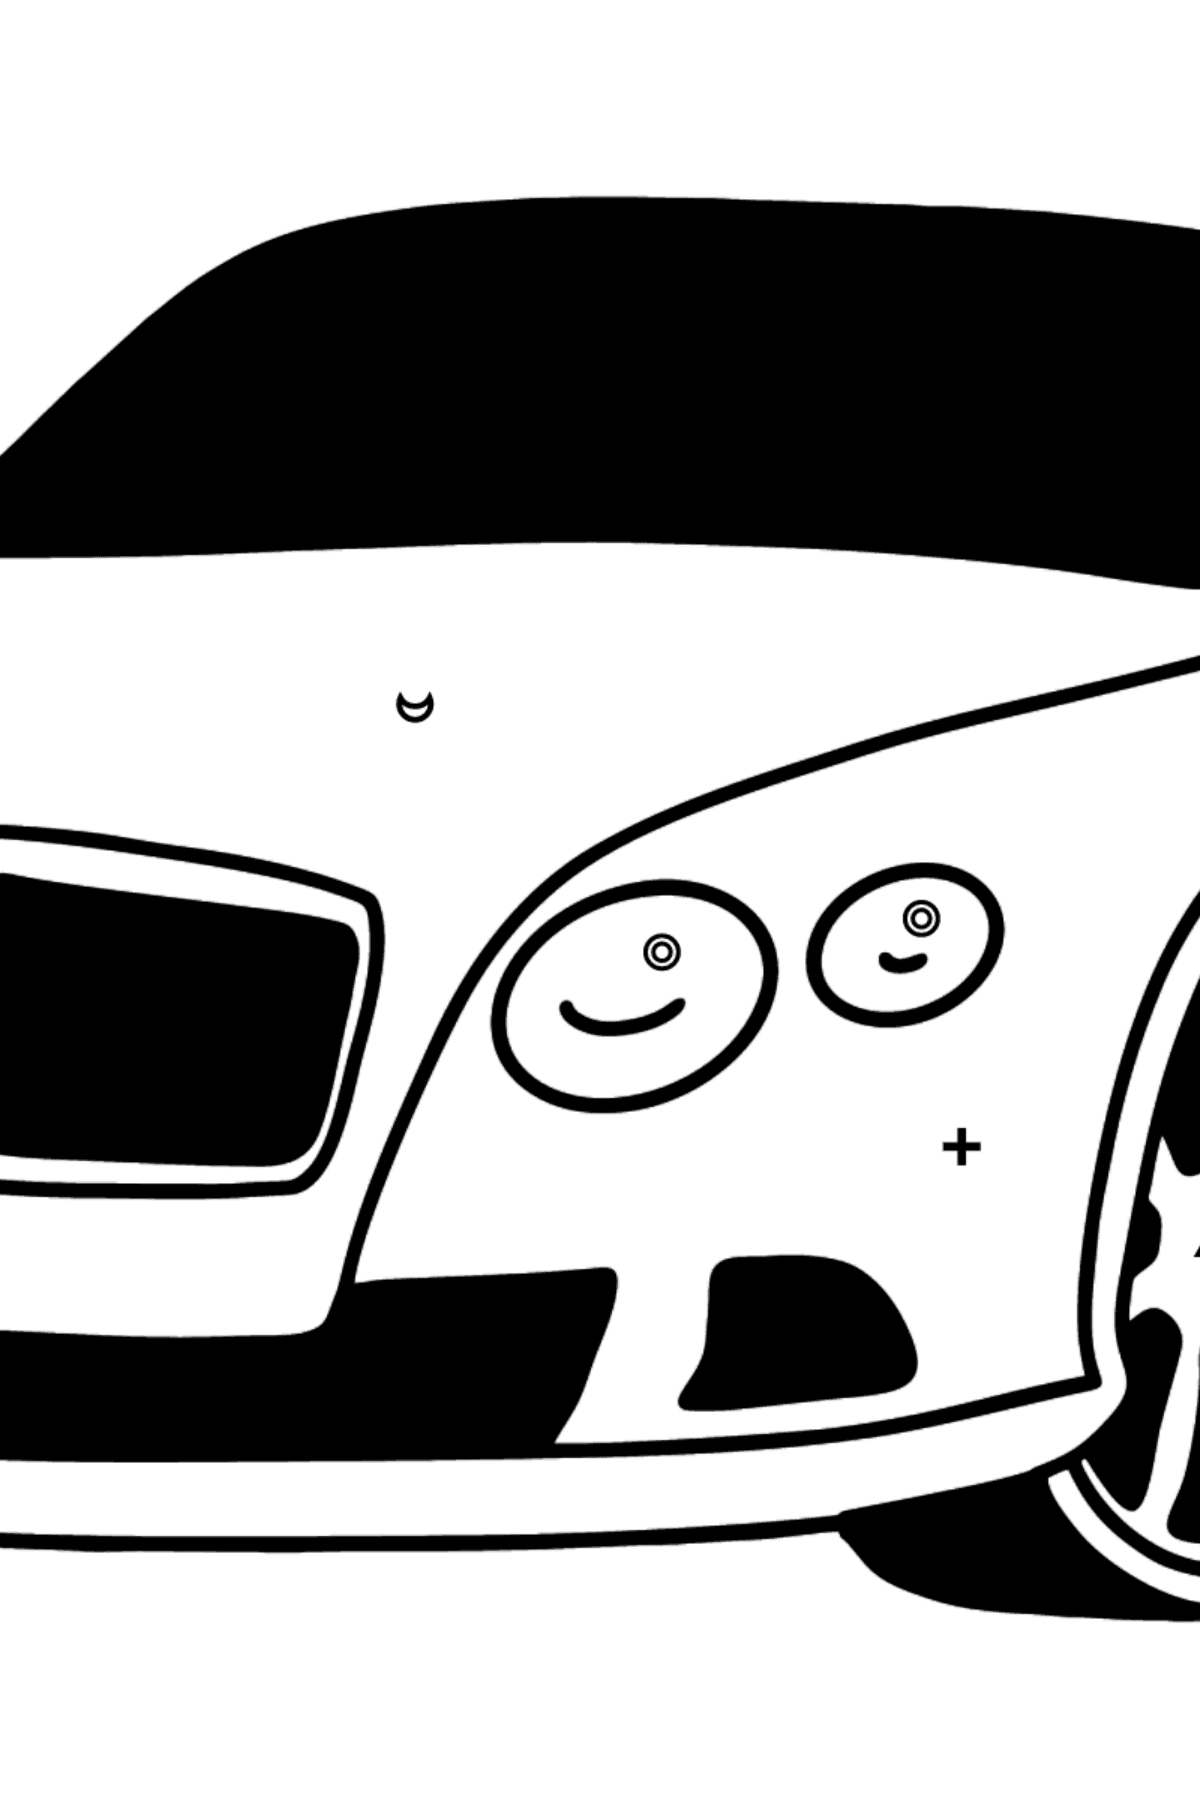 Bentley Continental GT Car coloring page - Coloring by Symbols and Geometric Shapes for Kids